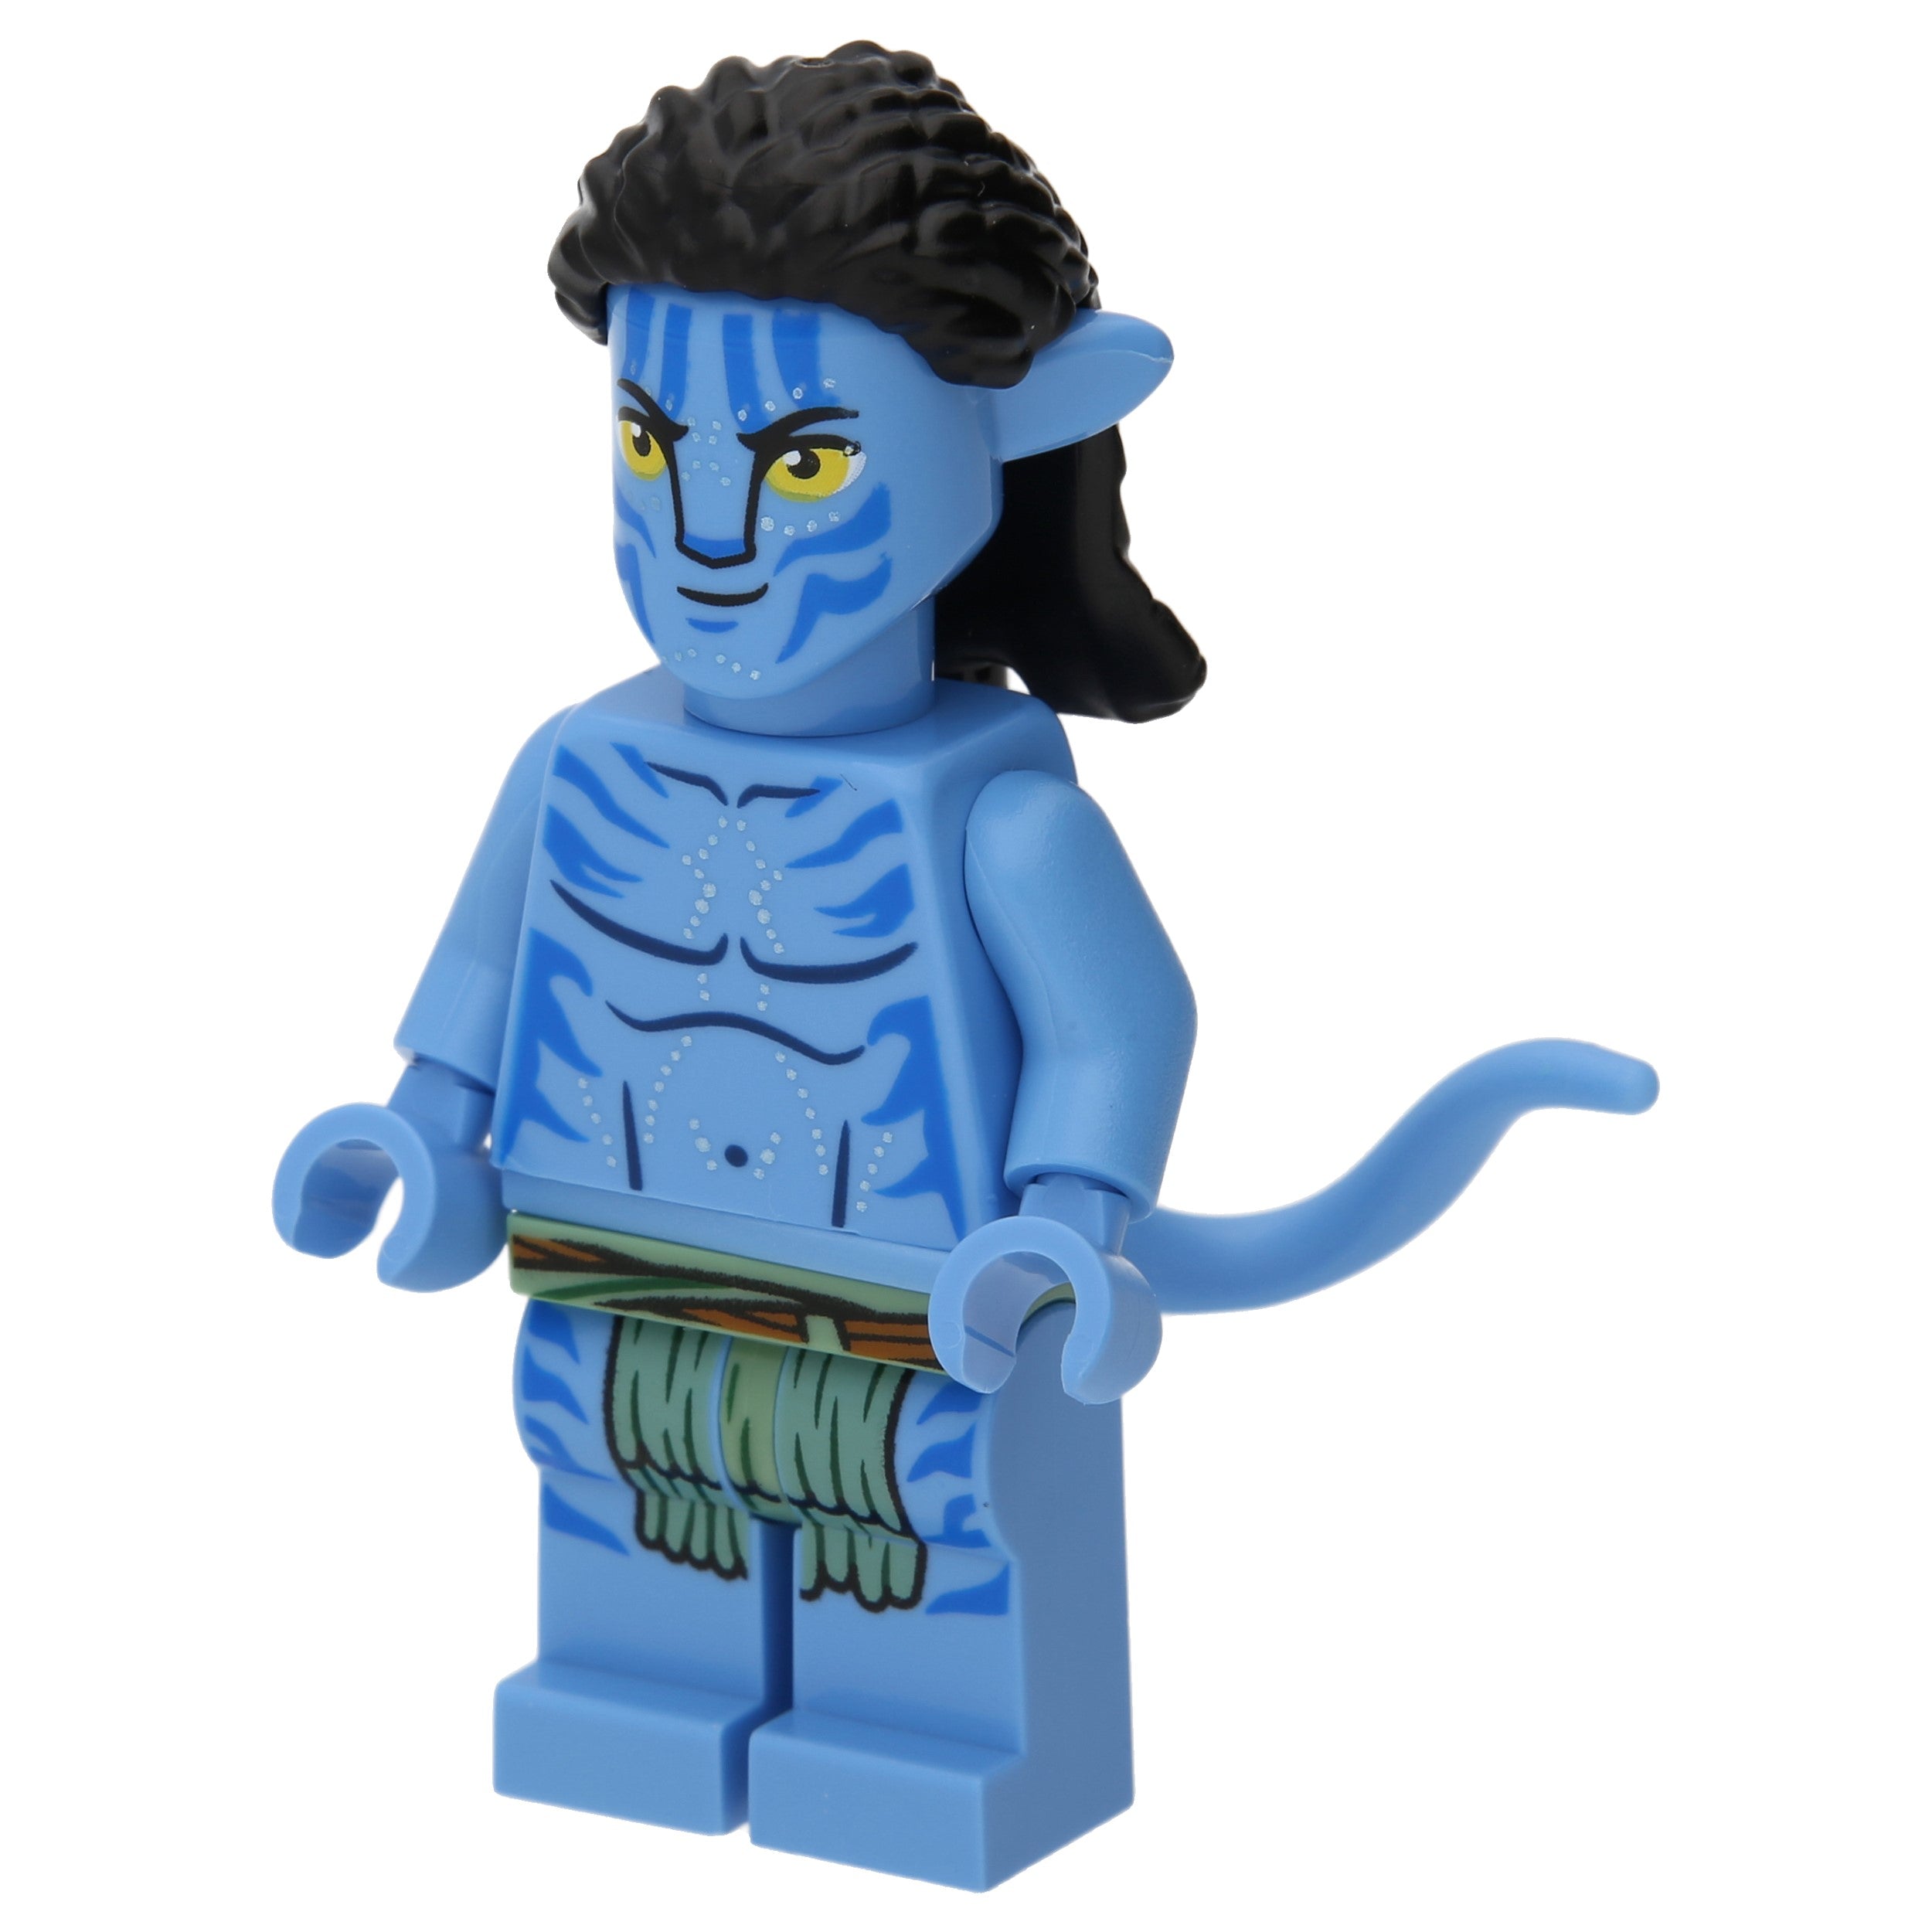 LEGO Avatar Minifigures - Lo'ak with Spear - avt020 - Avatar: The Way of Water